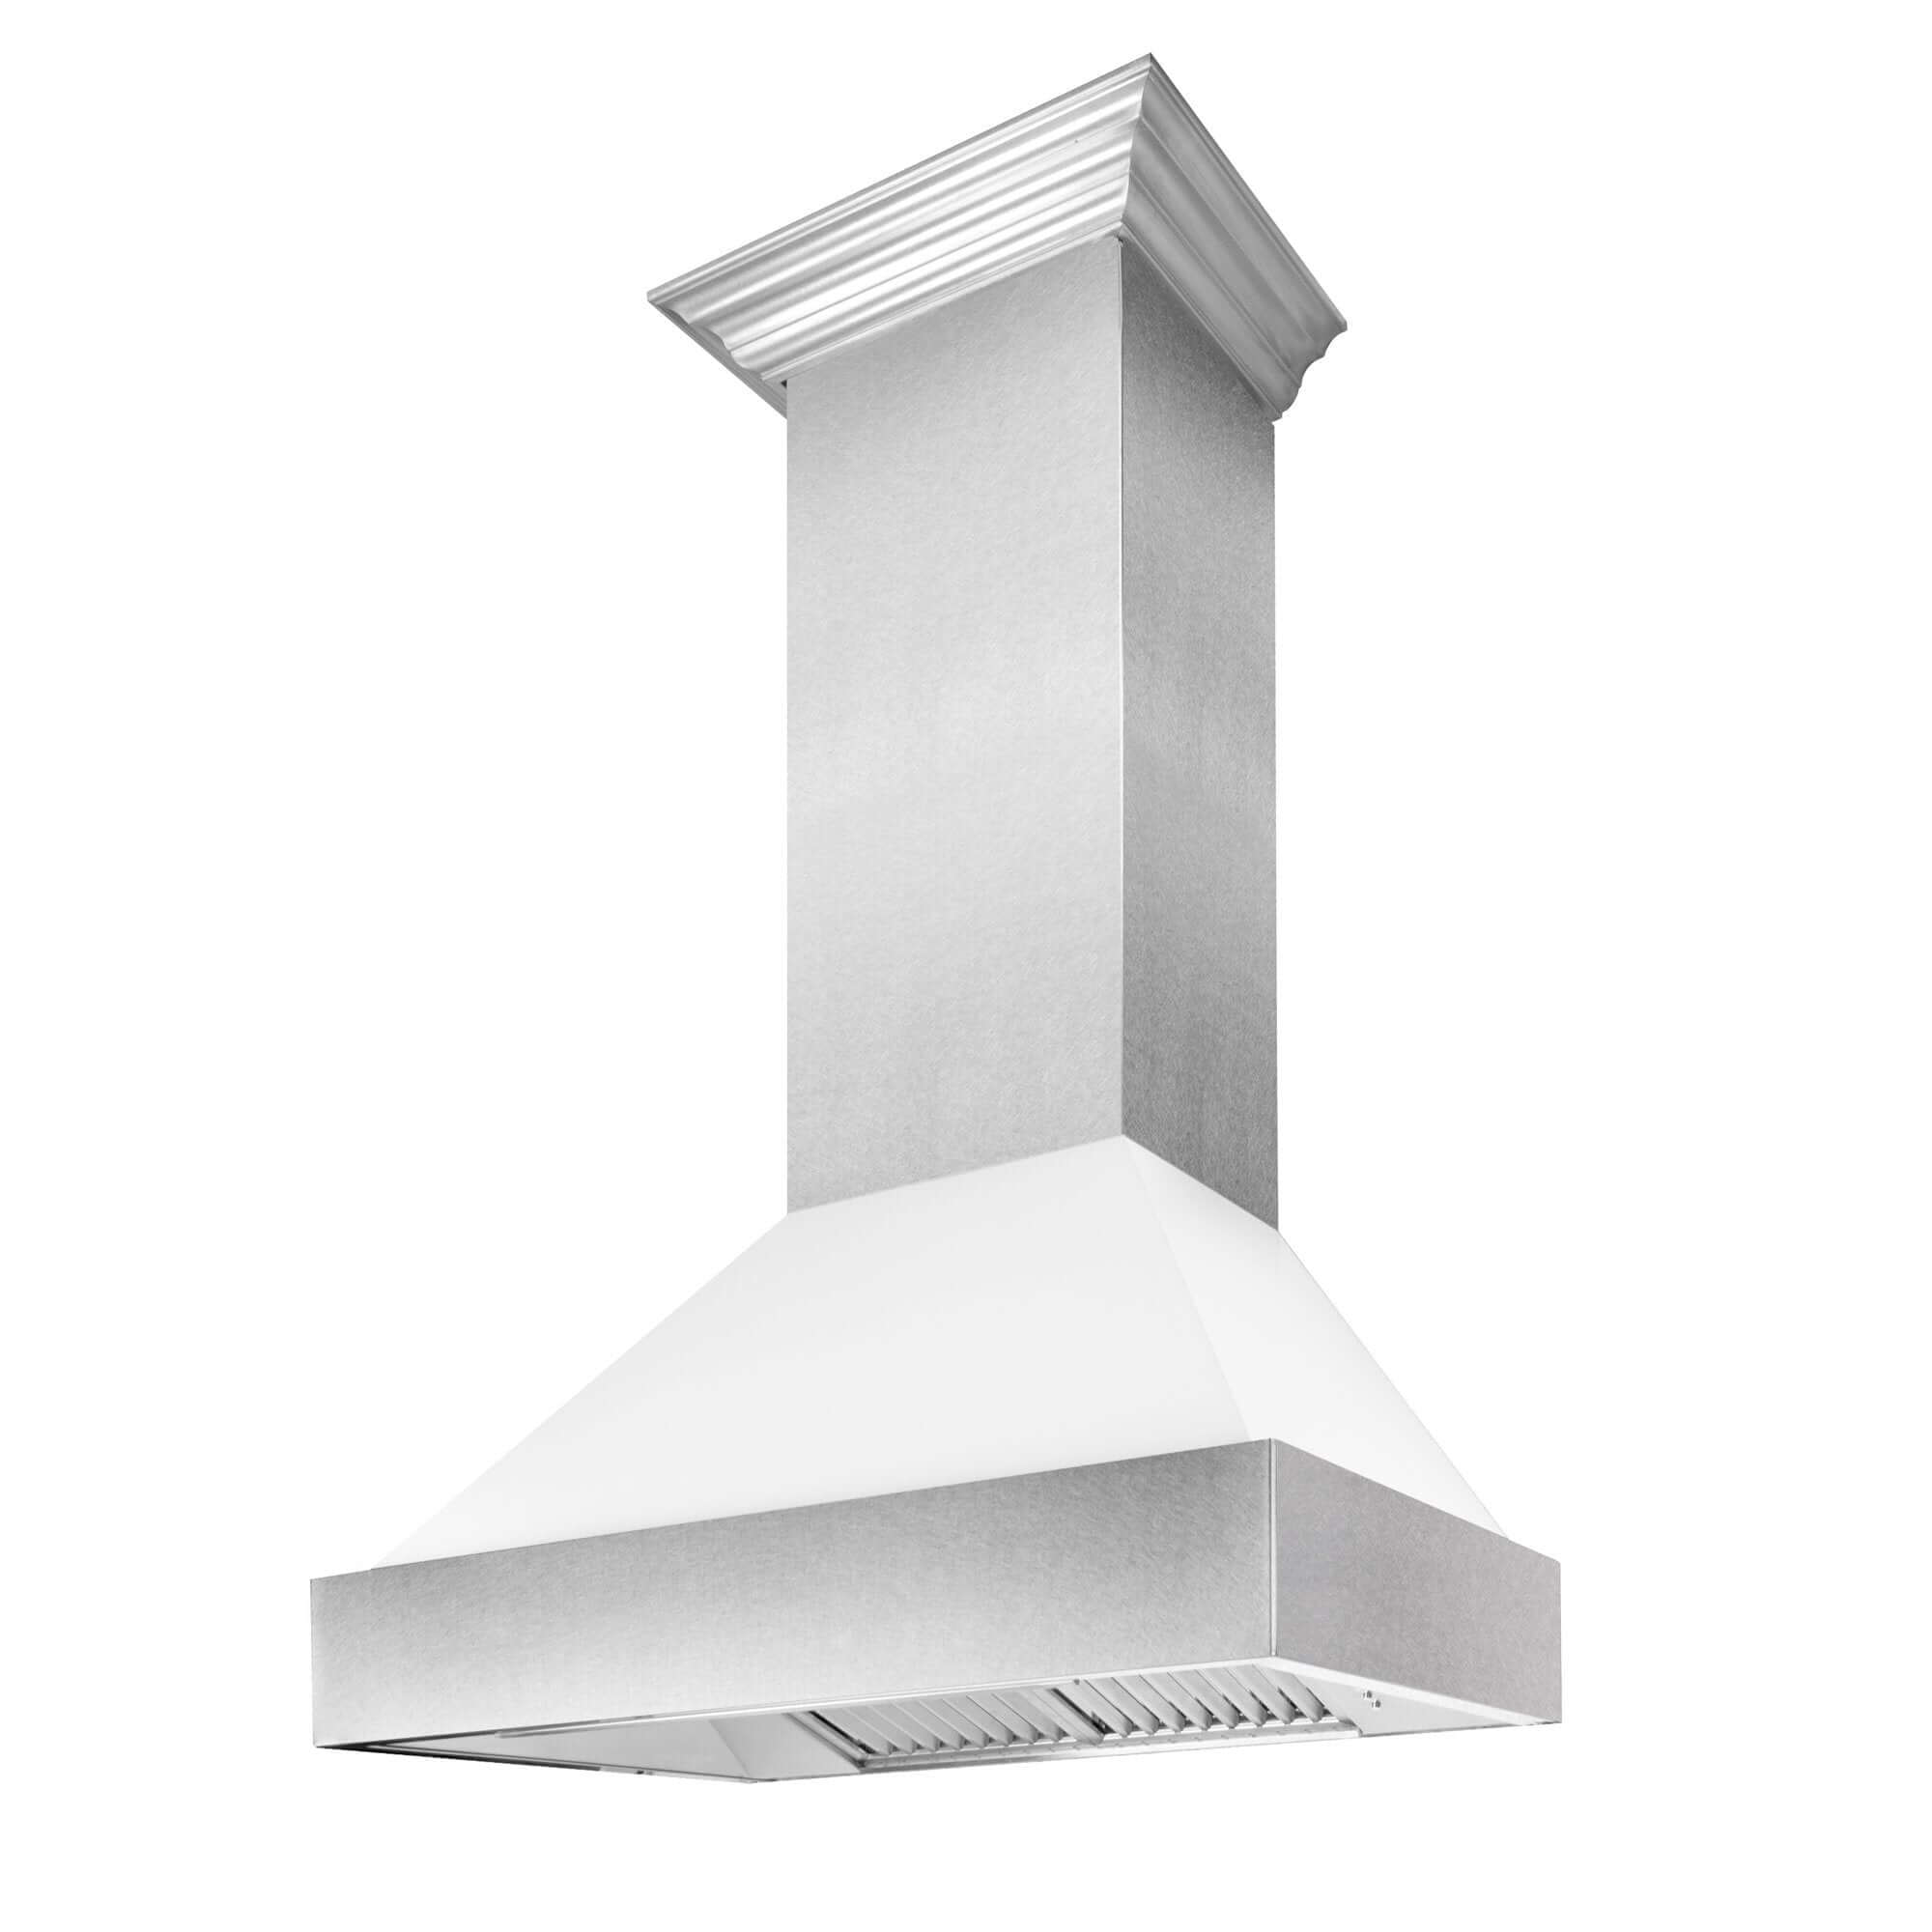 ZLINE 30 in. Kitchen Package with DuraSnow® Stainless Steel Dual Fuel Range with White Matte Door and Convertible Vent Range Hood (2KP-RASWMRH30)